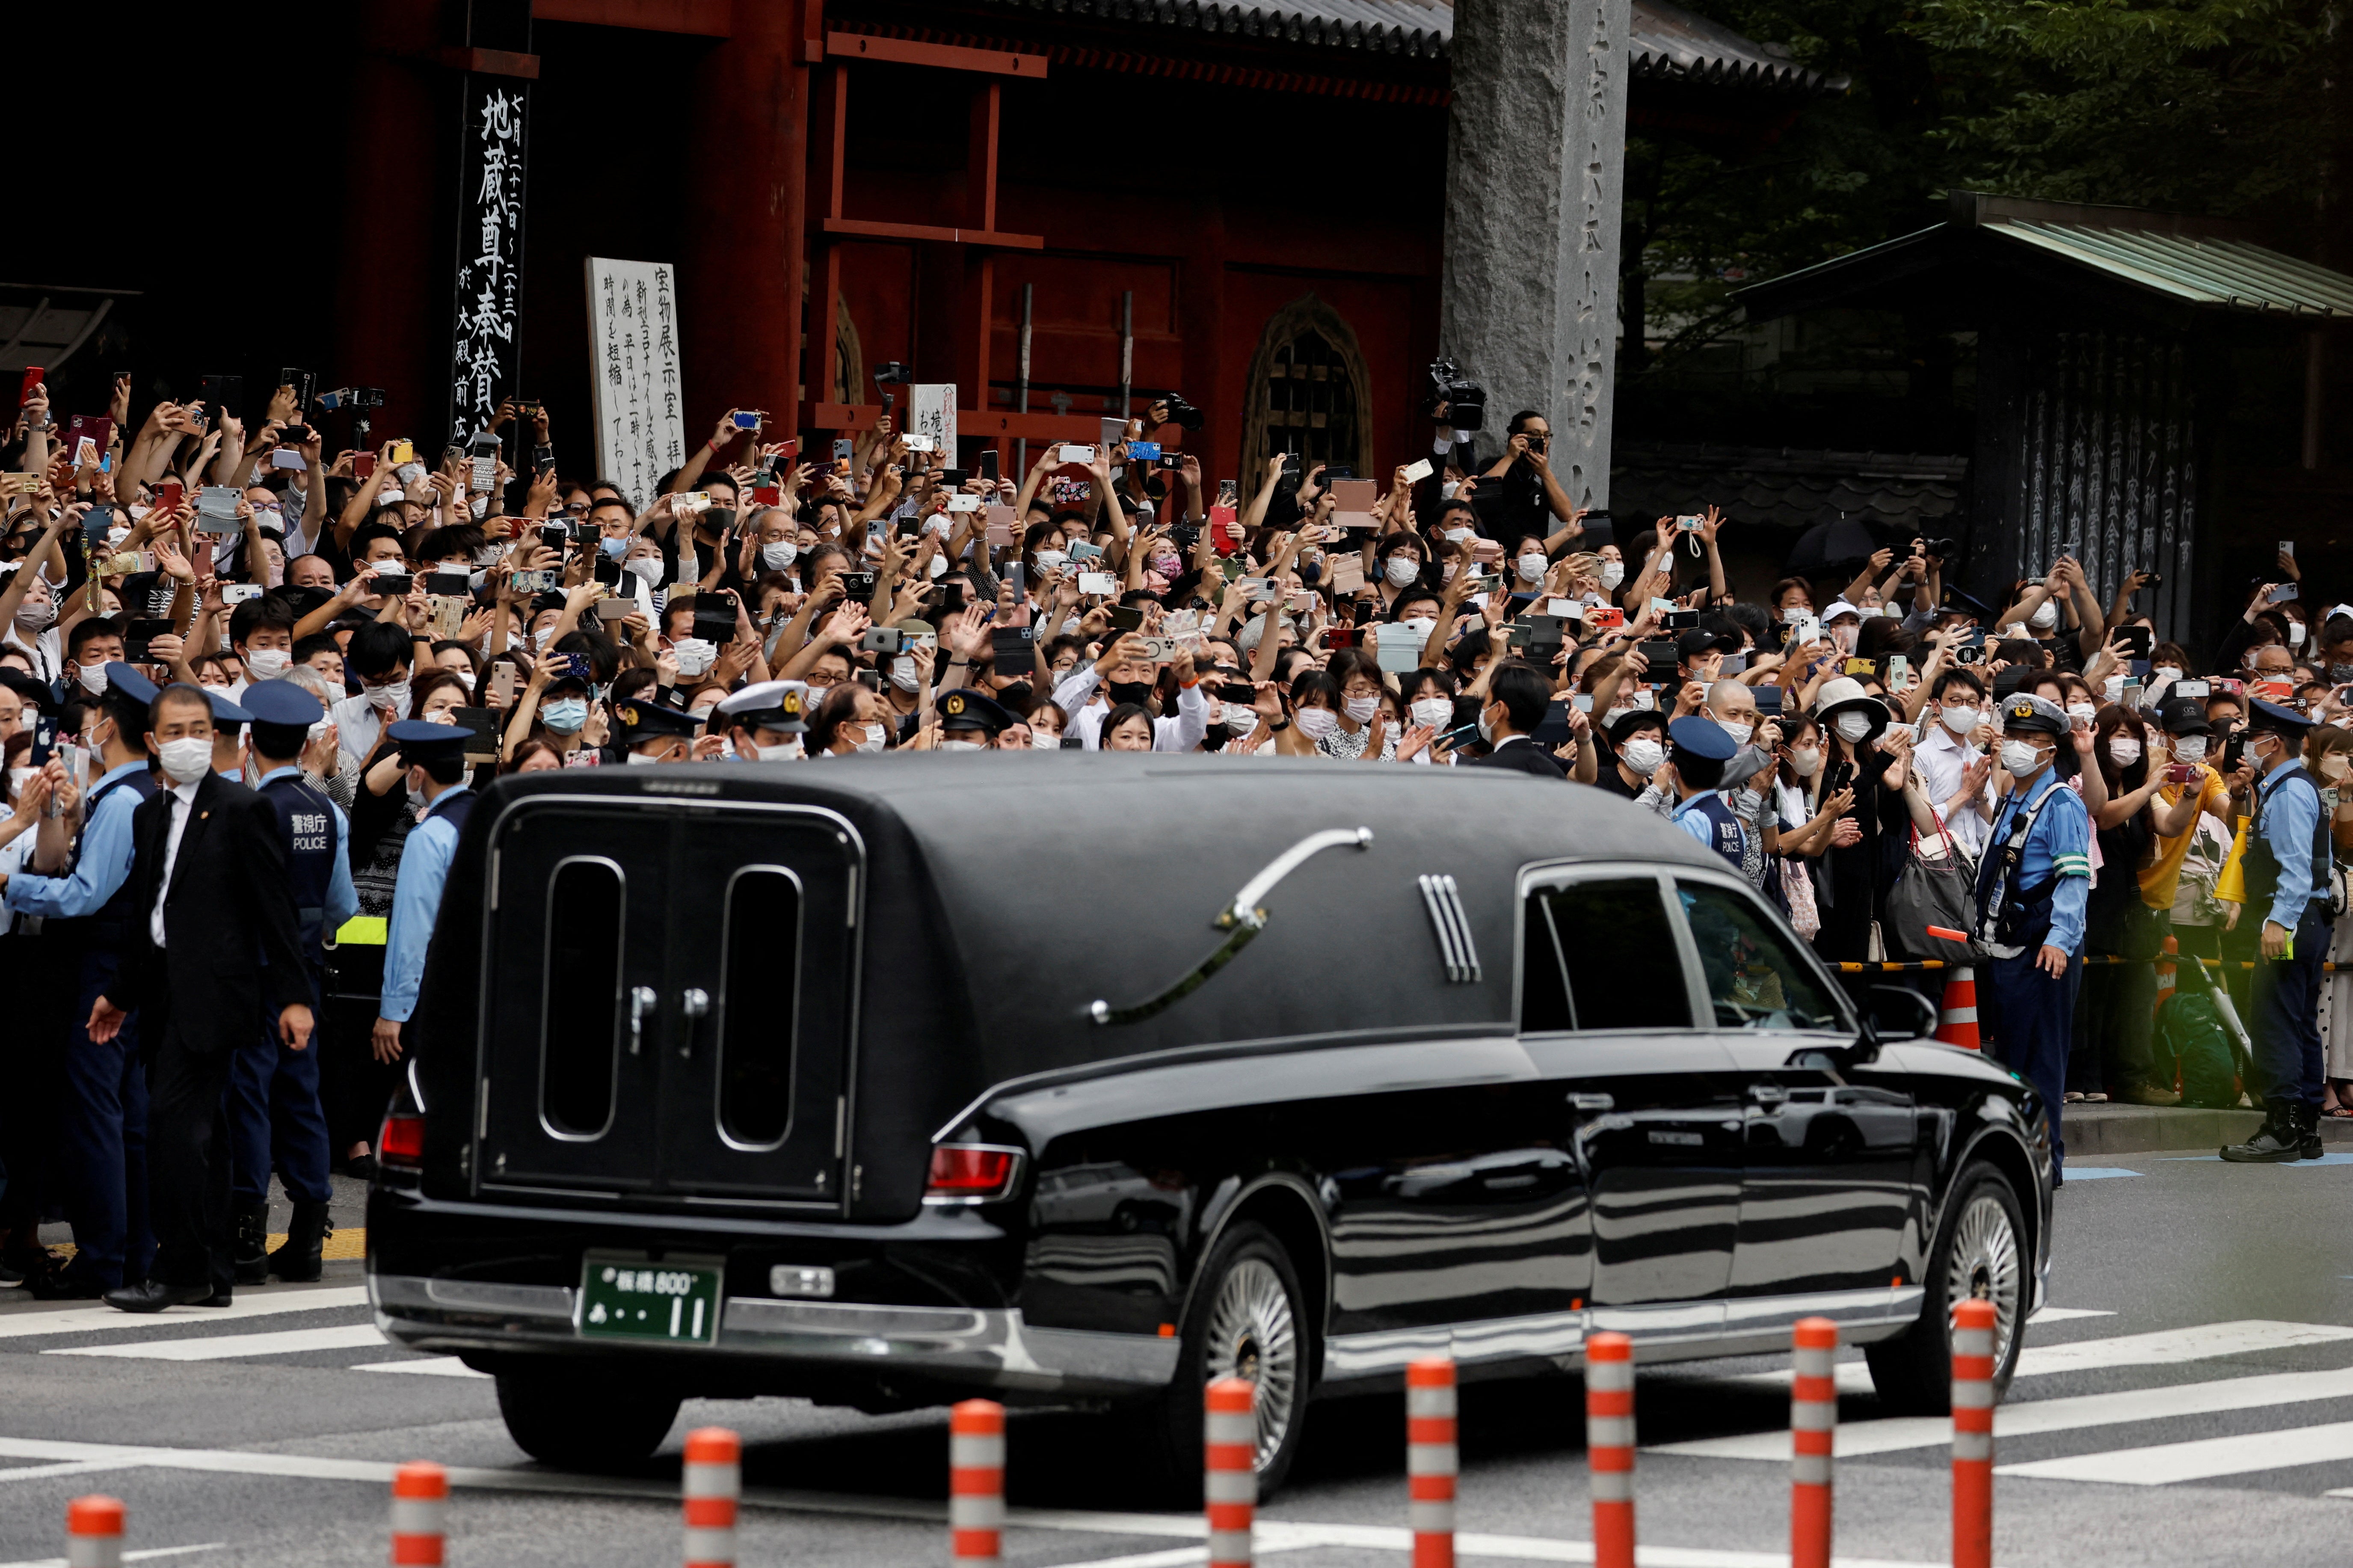 A vehicle carrying the body of the former Japanese prime minister leaves the Zojoji temple after his funeral